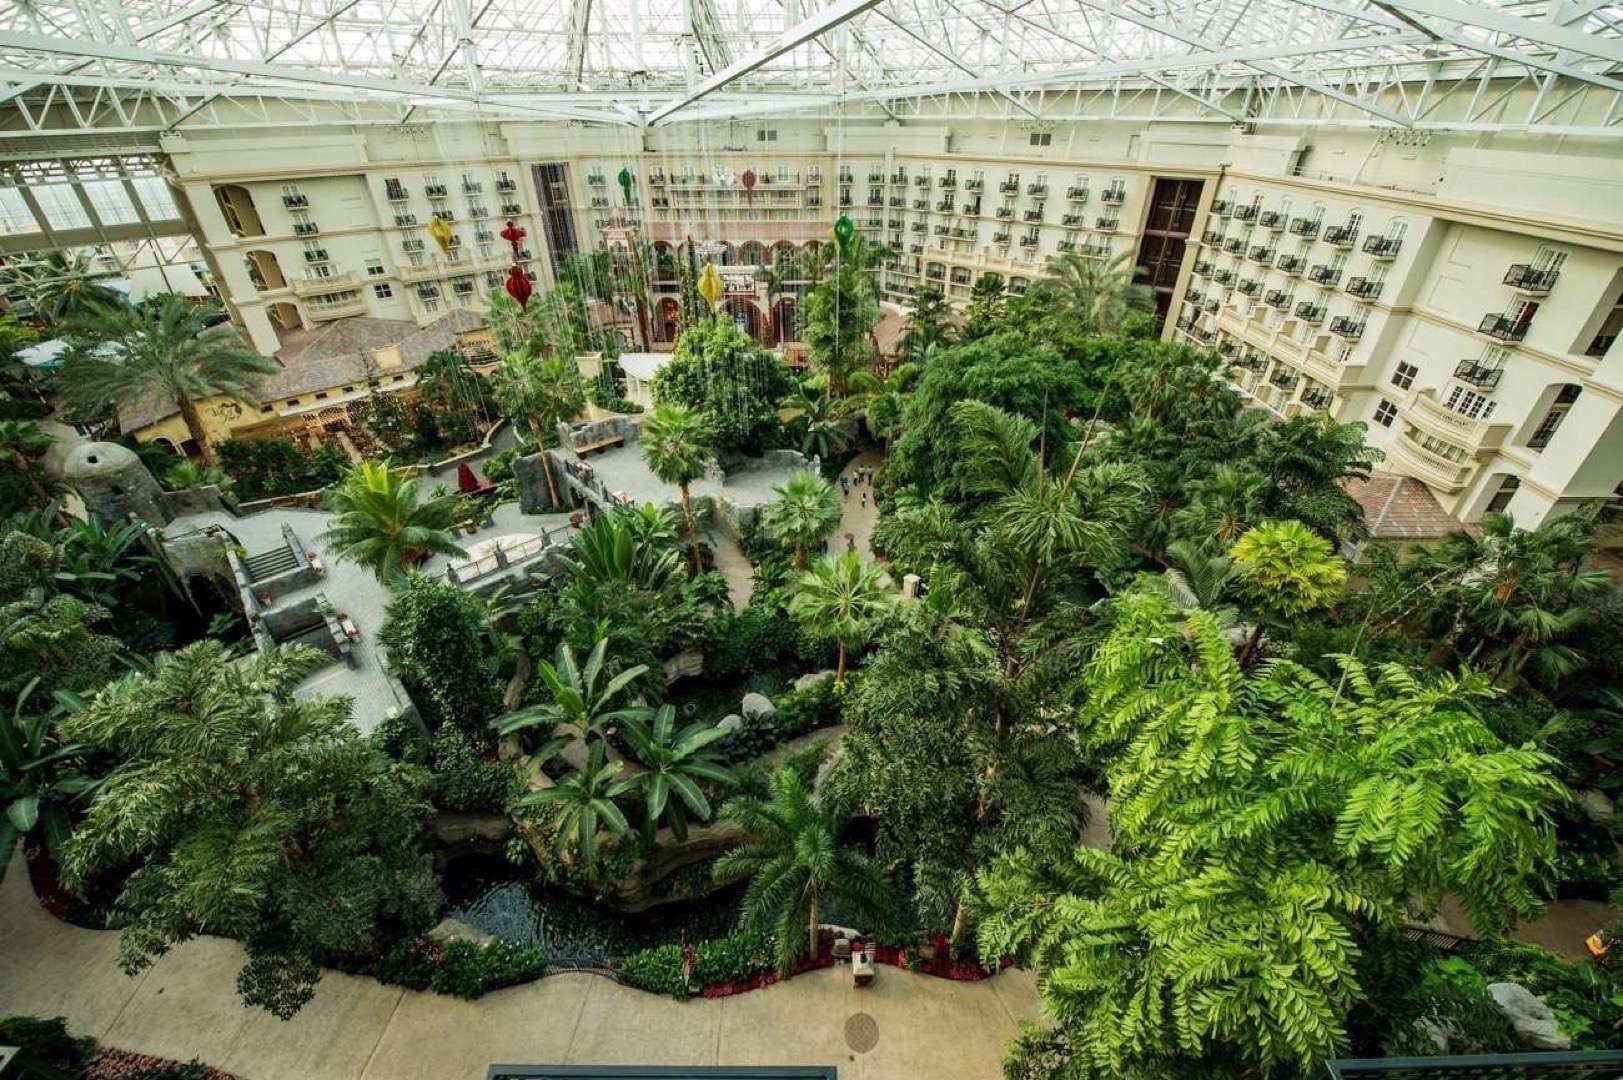 Gaylord Palms Resort and Convention Center Overheard of interior showing middle of area with many palm trees and trees.